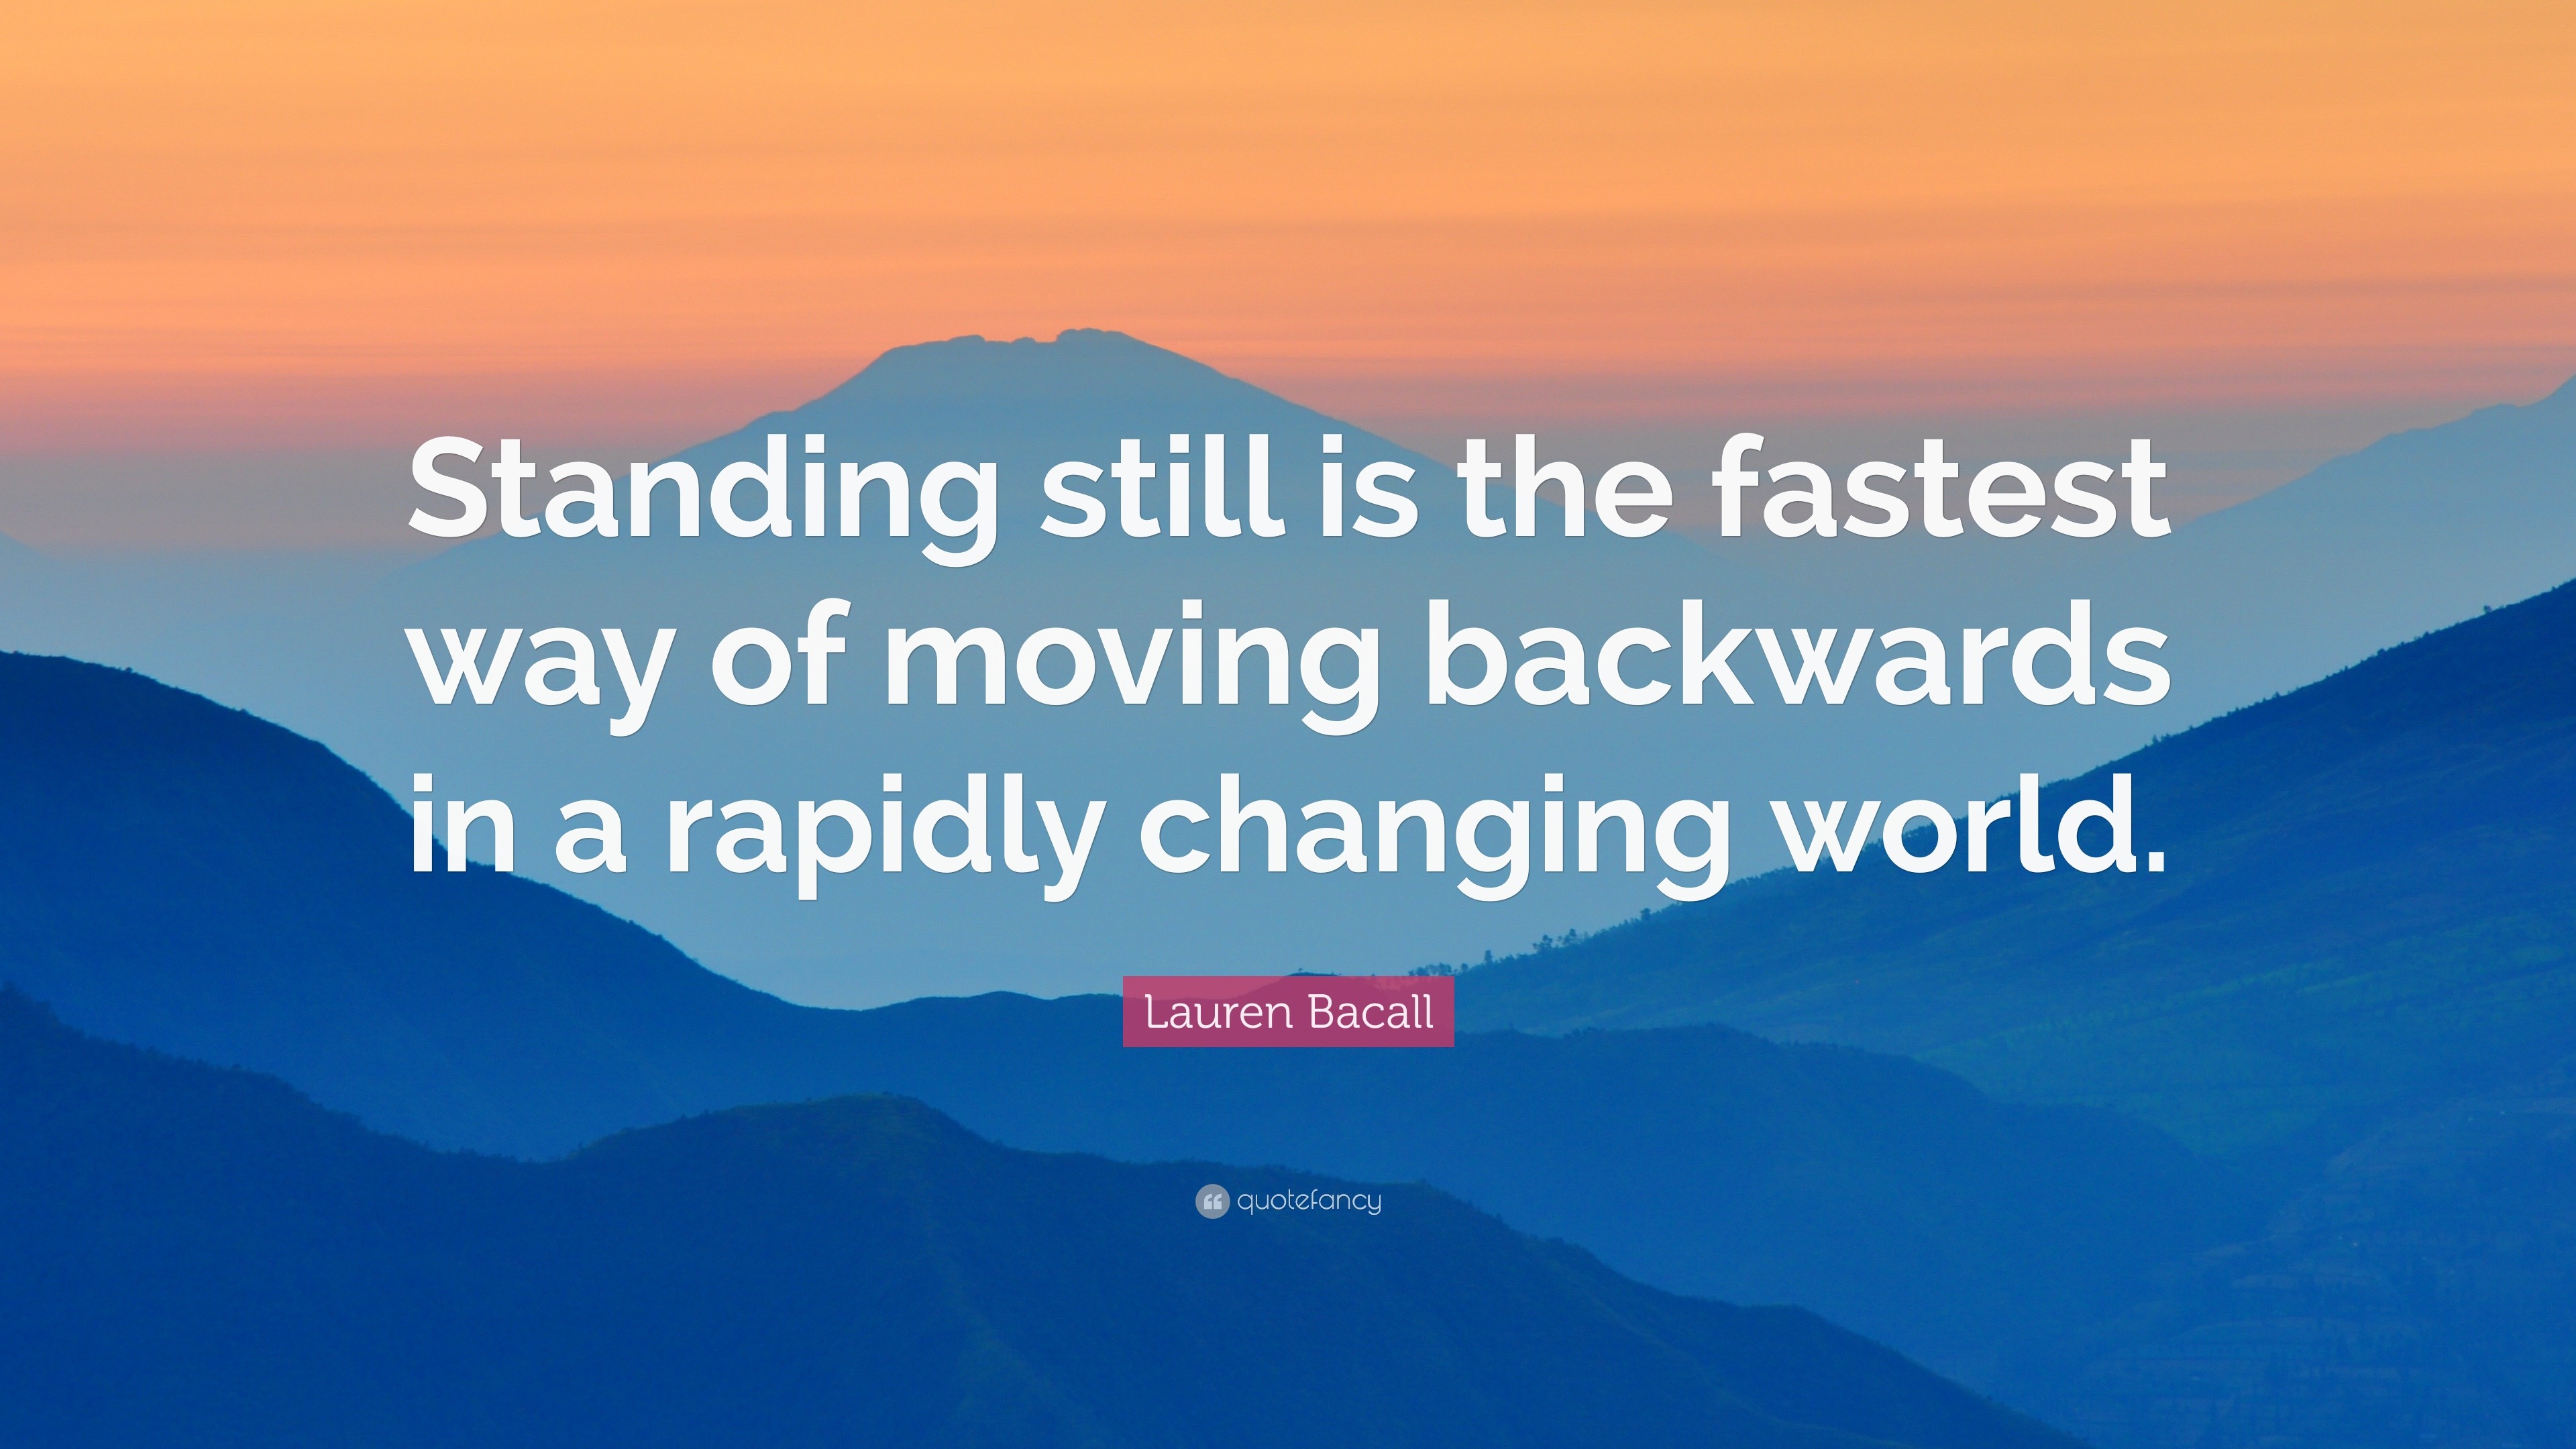 Lauren Bacall Quote: “Standing still is the fastest way of moving backwards  in a rapidly changing